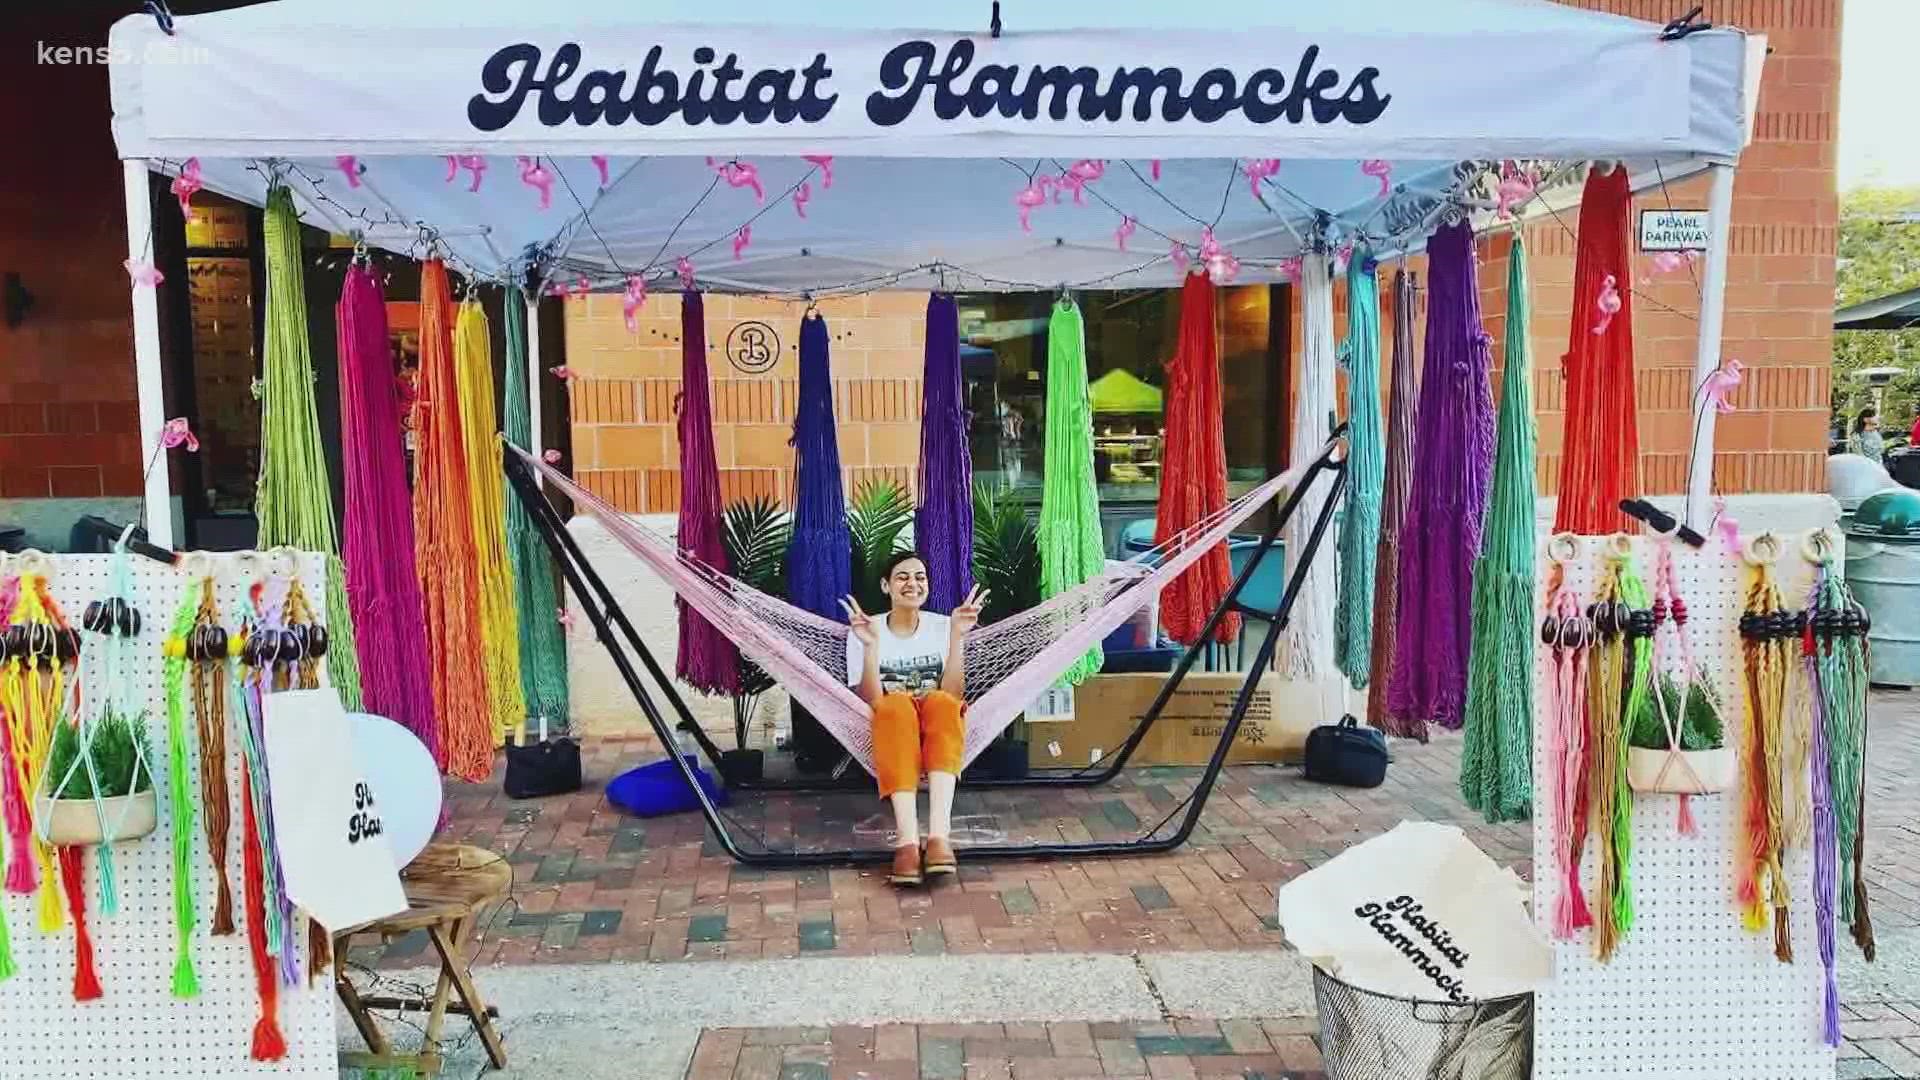 Stephanie Koithan of Habitat Hammocks shares how she got started at a young age at the loom.